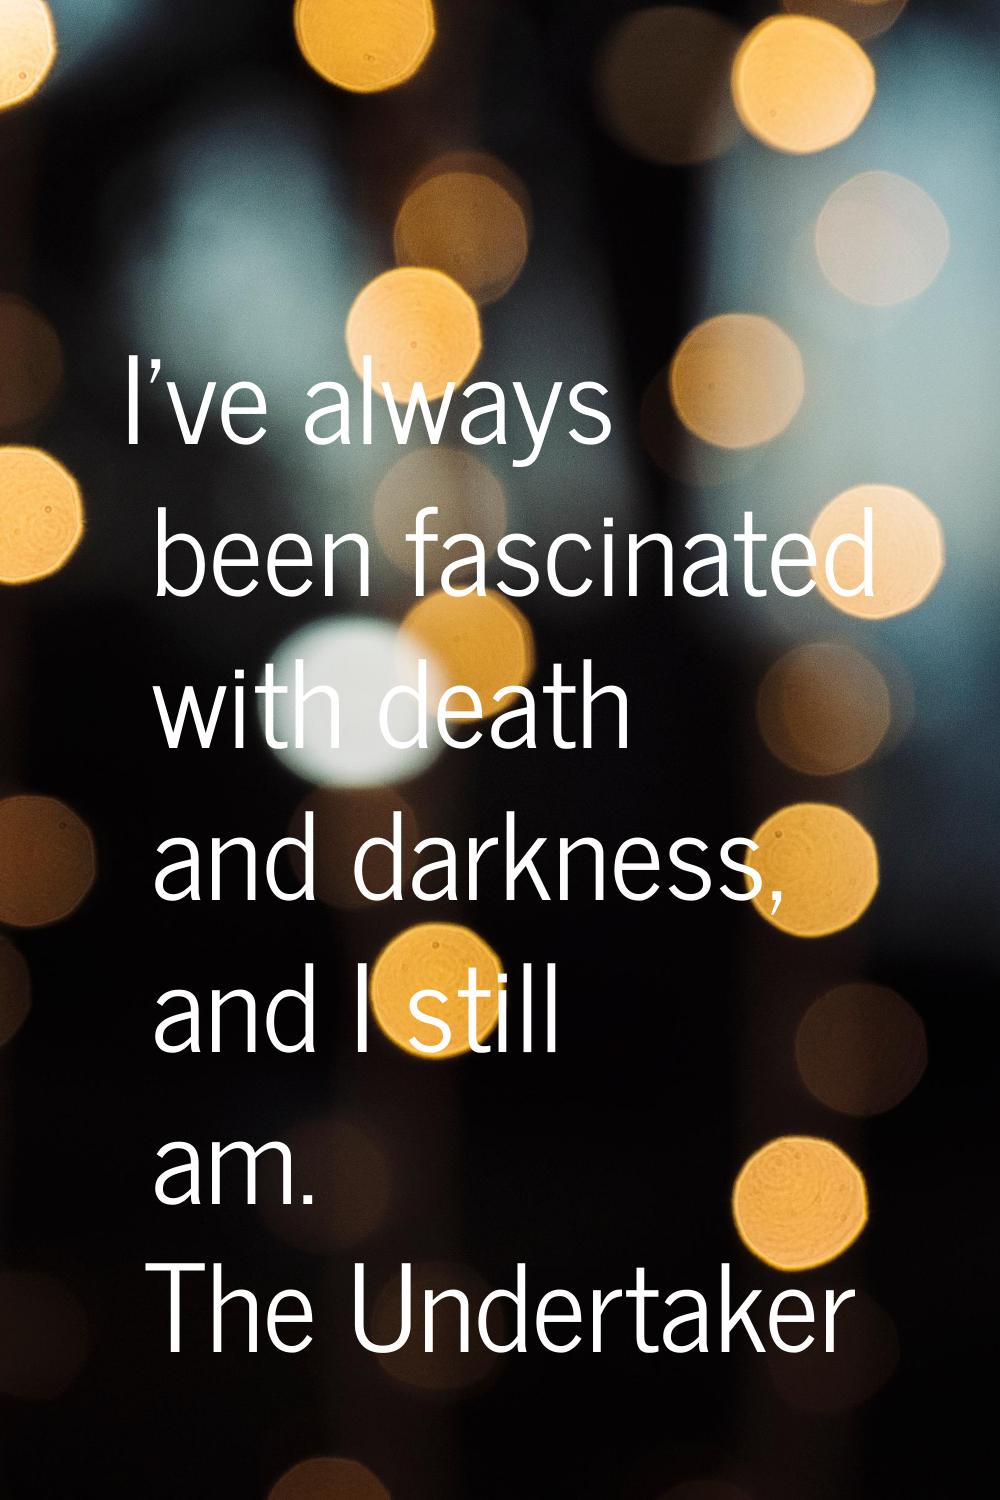 I've always been fascinated with death and darkness, and I still am.